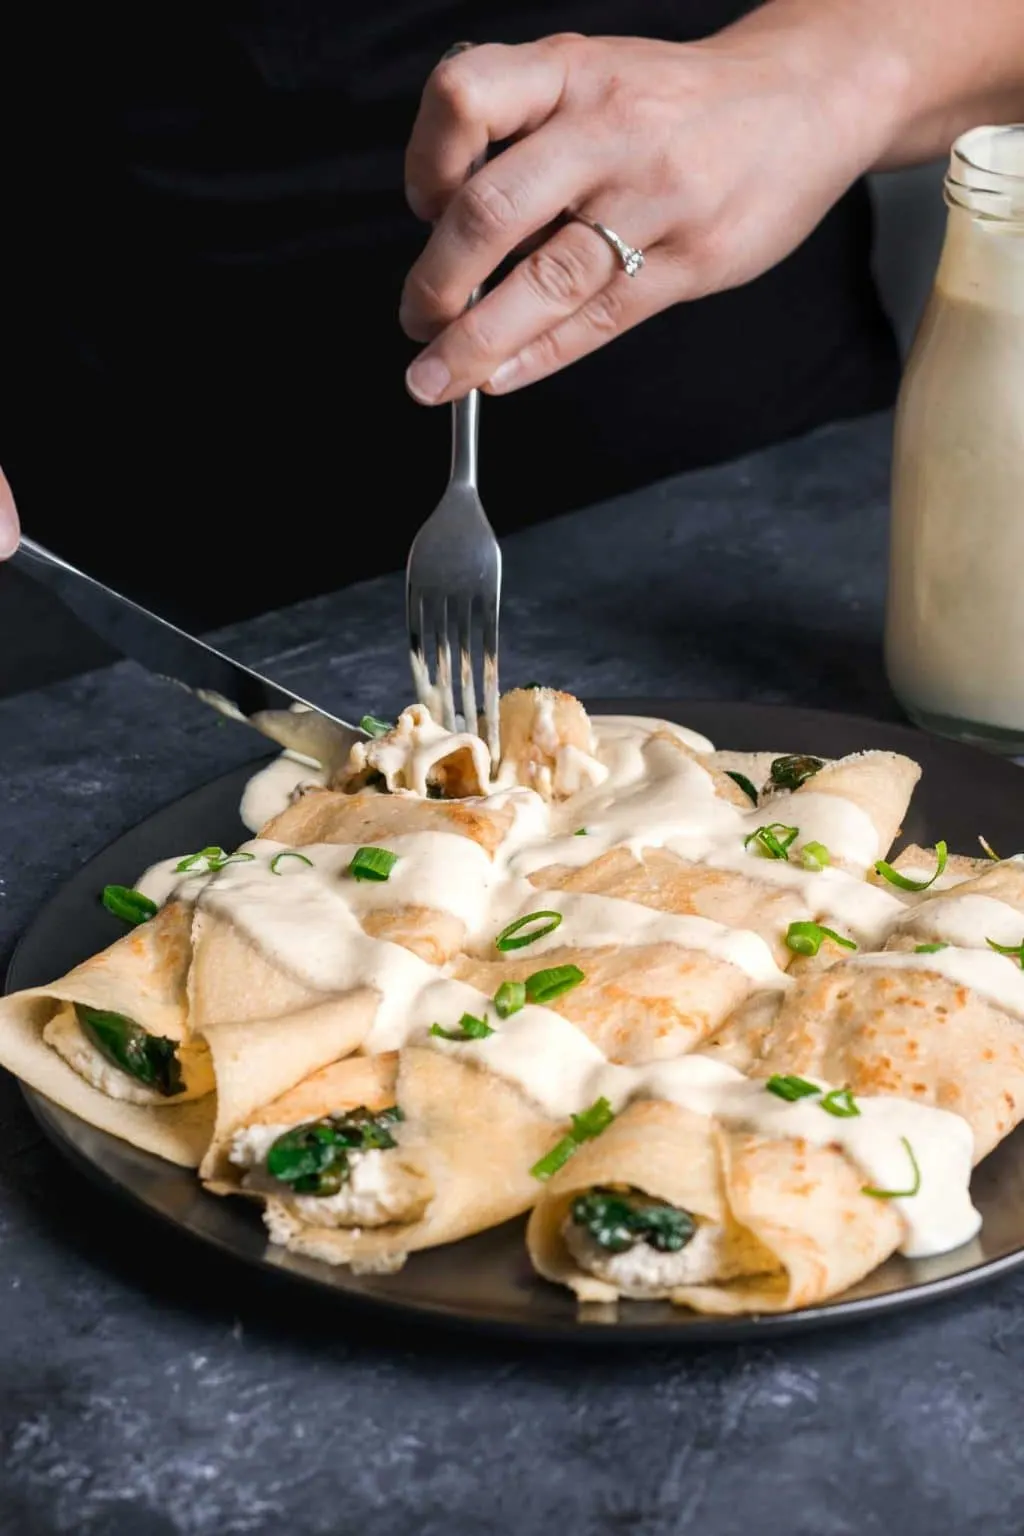 Cutting into savory crepes stuffed with almond cheese and sauteed spinach with vegan hollandaise drizzled on top. Garnished with scallion greens.